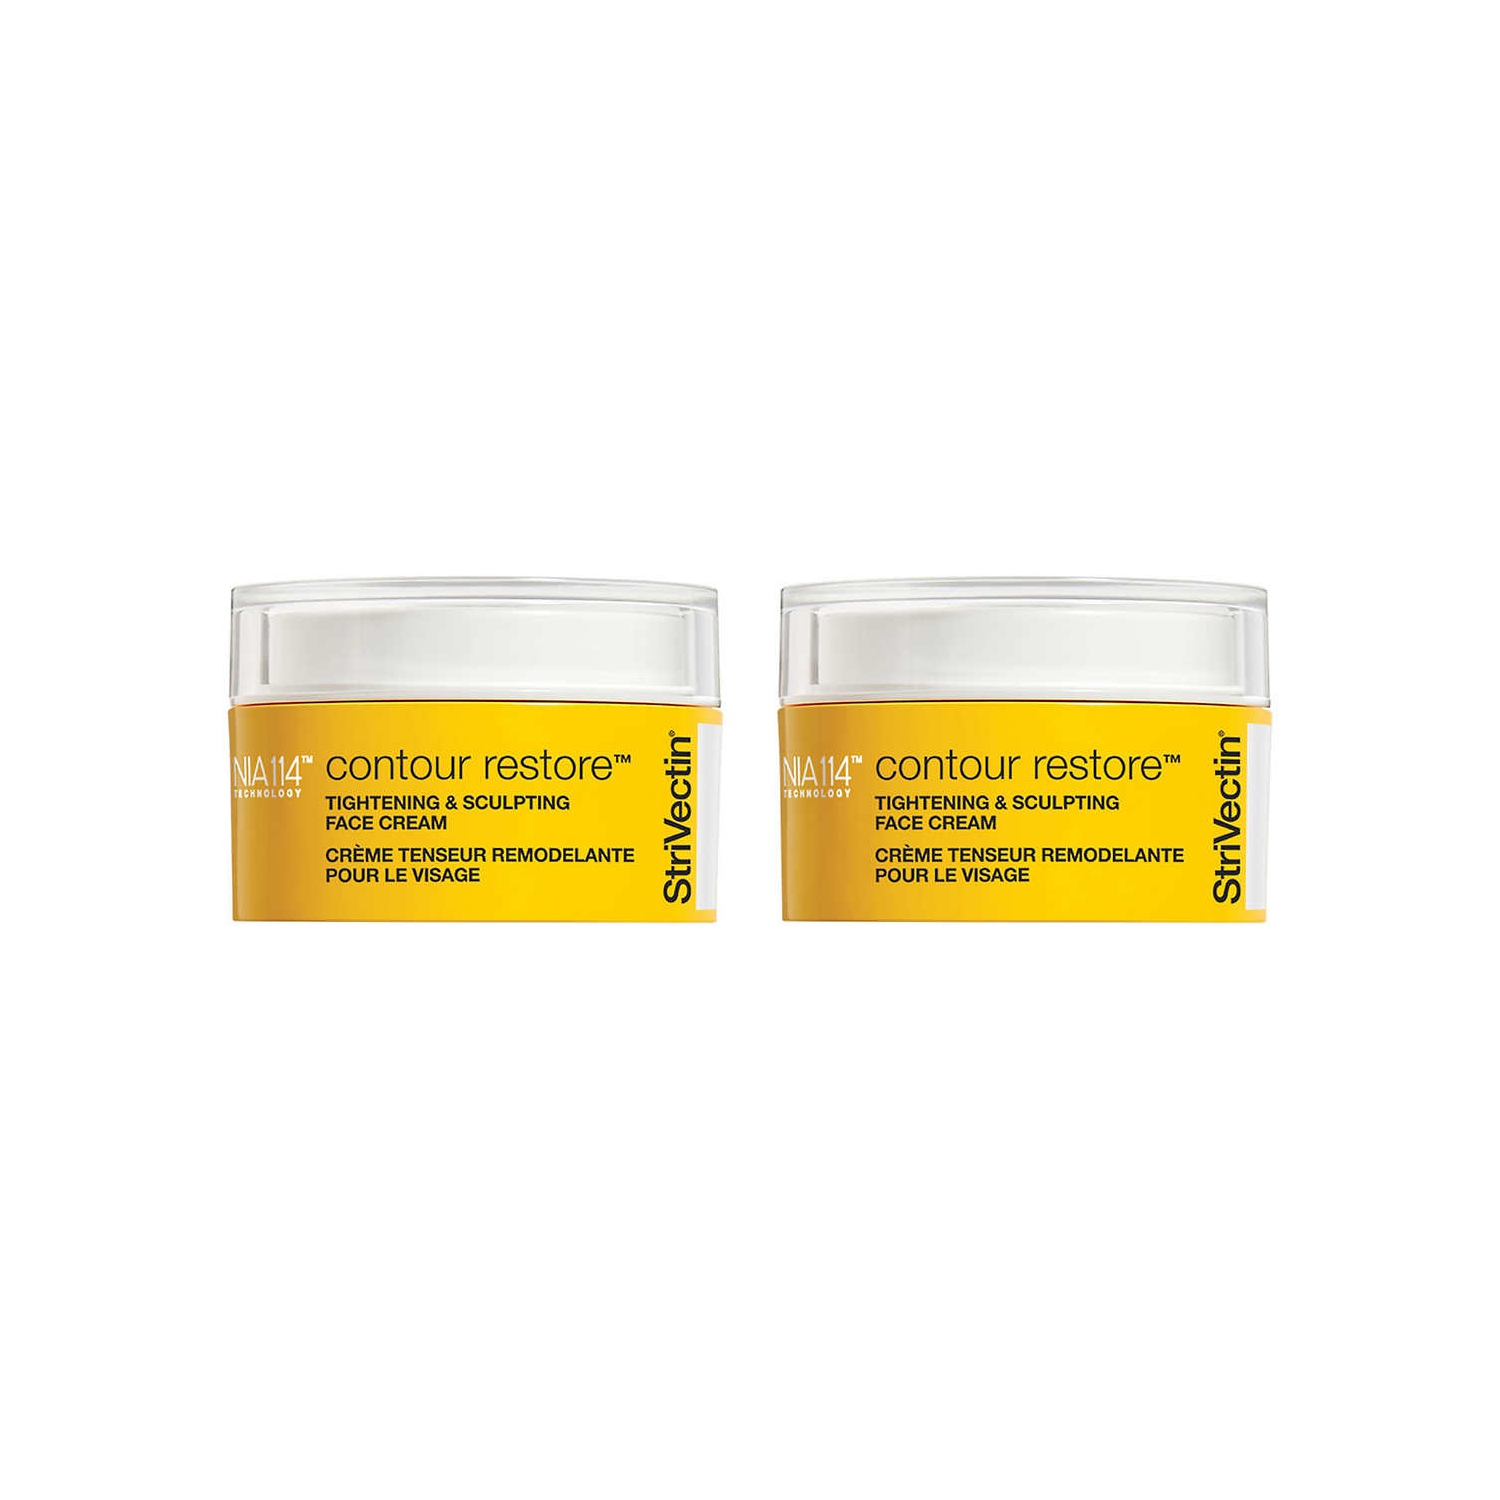 StriVectin Contour Restore Tightening & Sculpting Face Cream, Visibly plump, firm, and lift, 2-pack